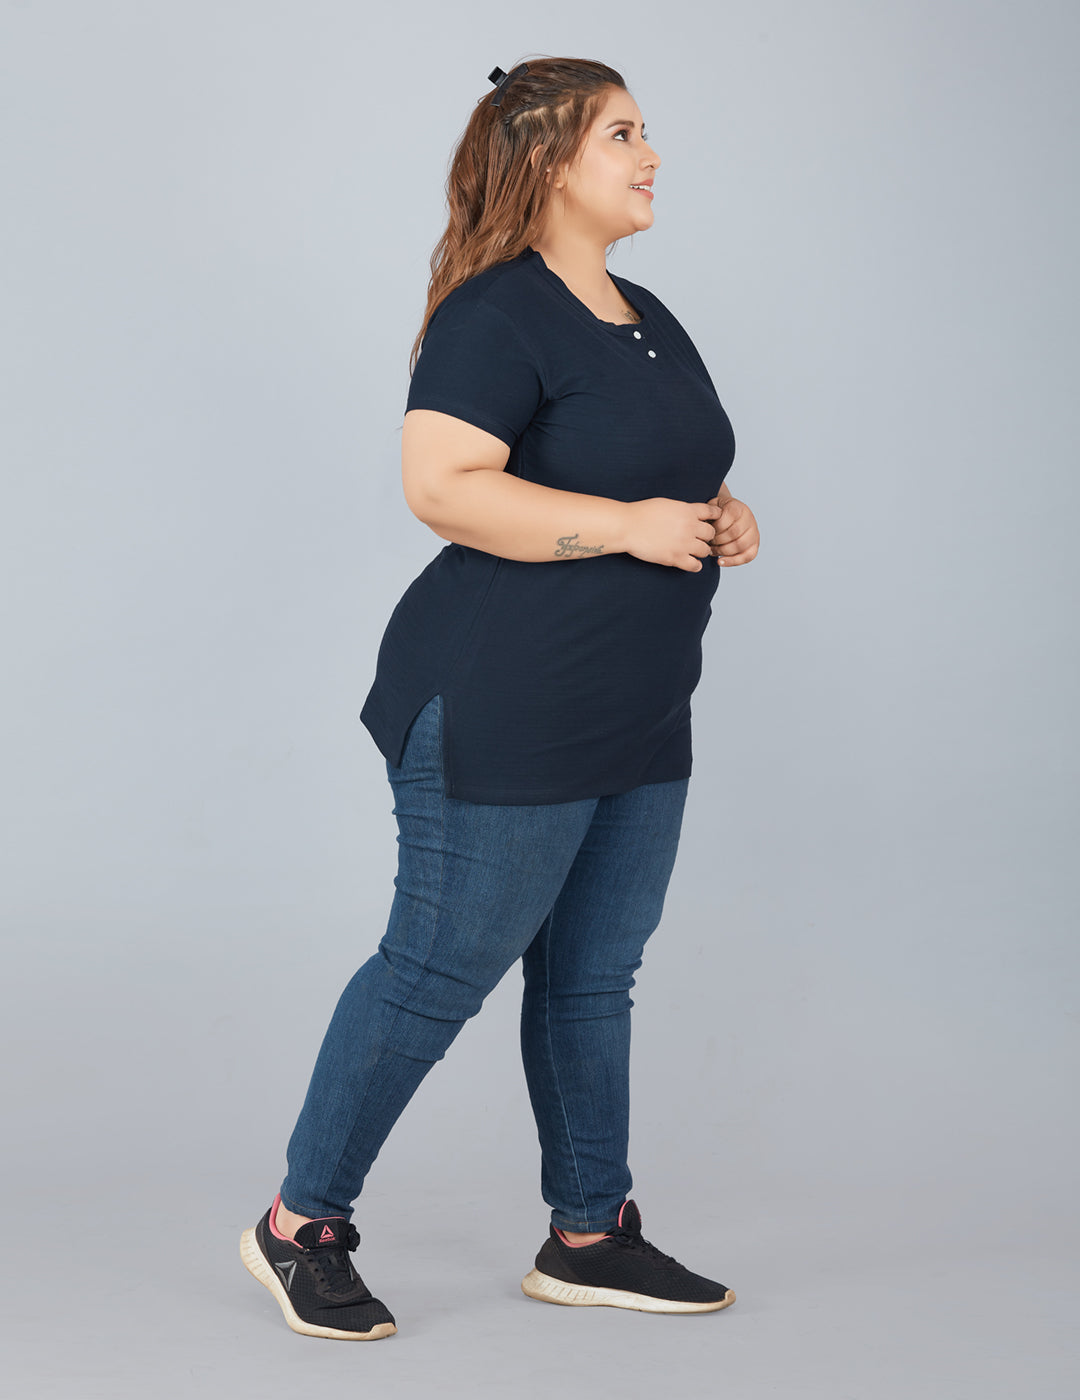 Plus Size Cotton T-shirts For Summer - Imperial Blue